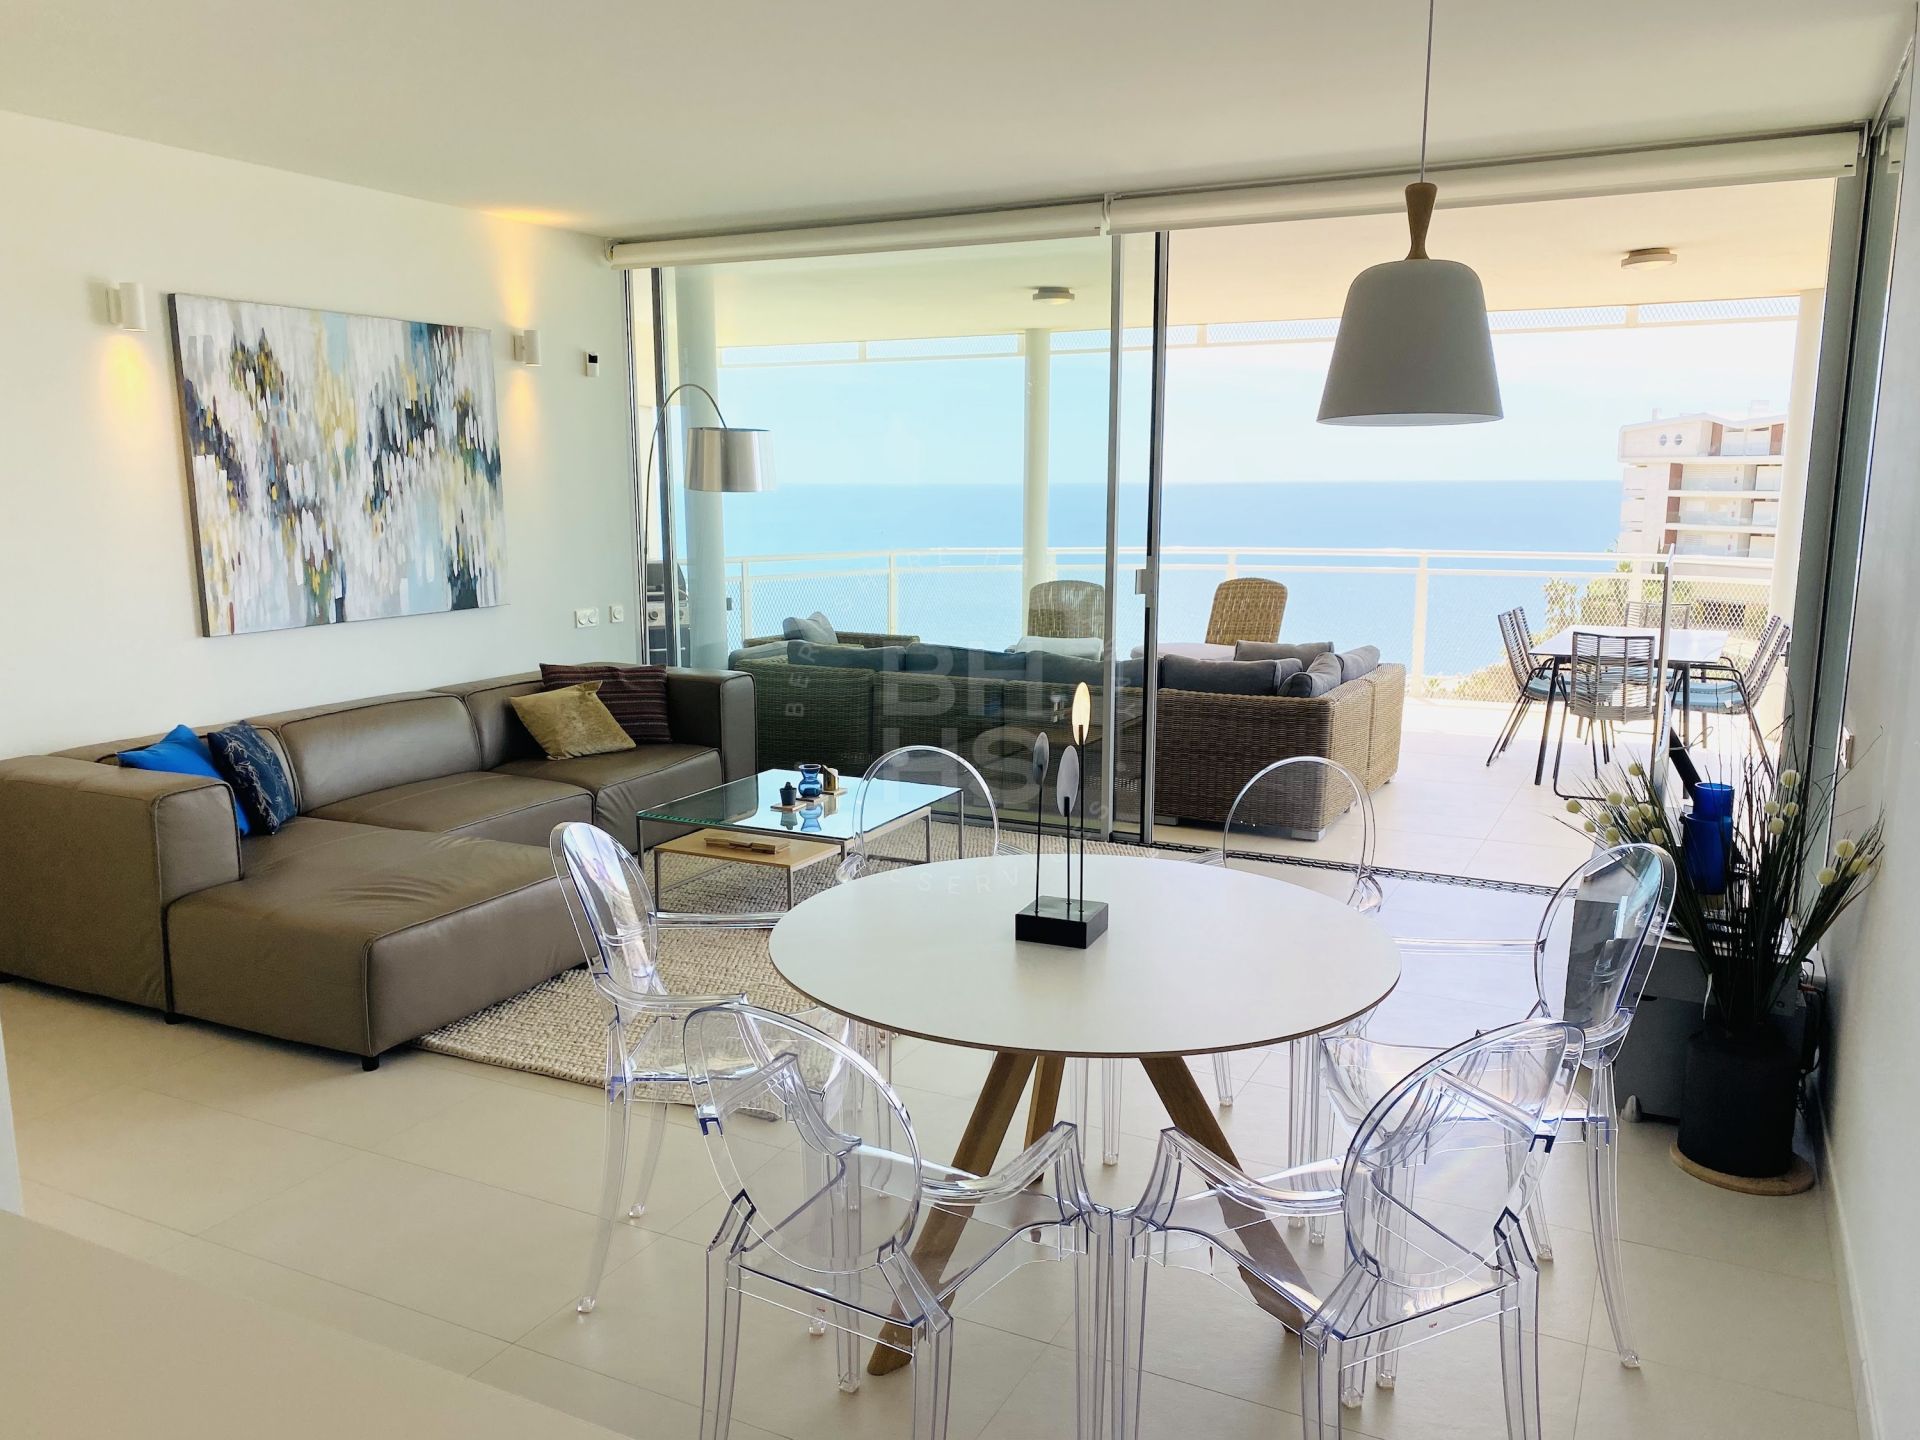 Fully Furnished Townhouse with Sea Views in the Best Part of Marbella